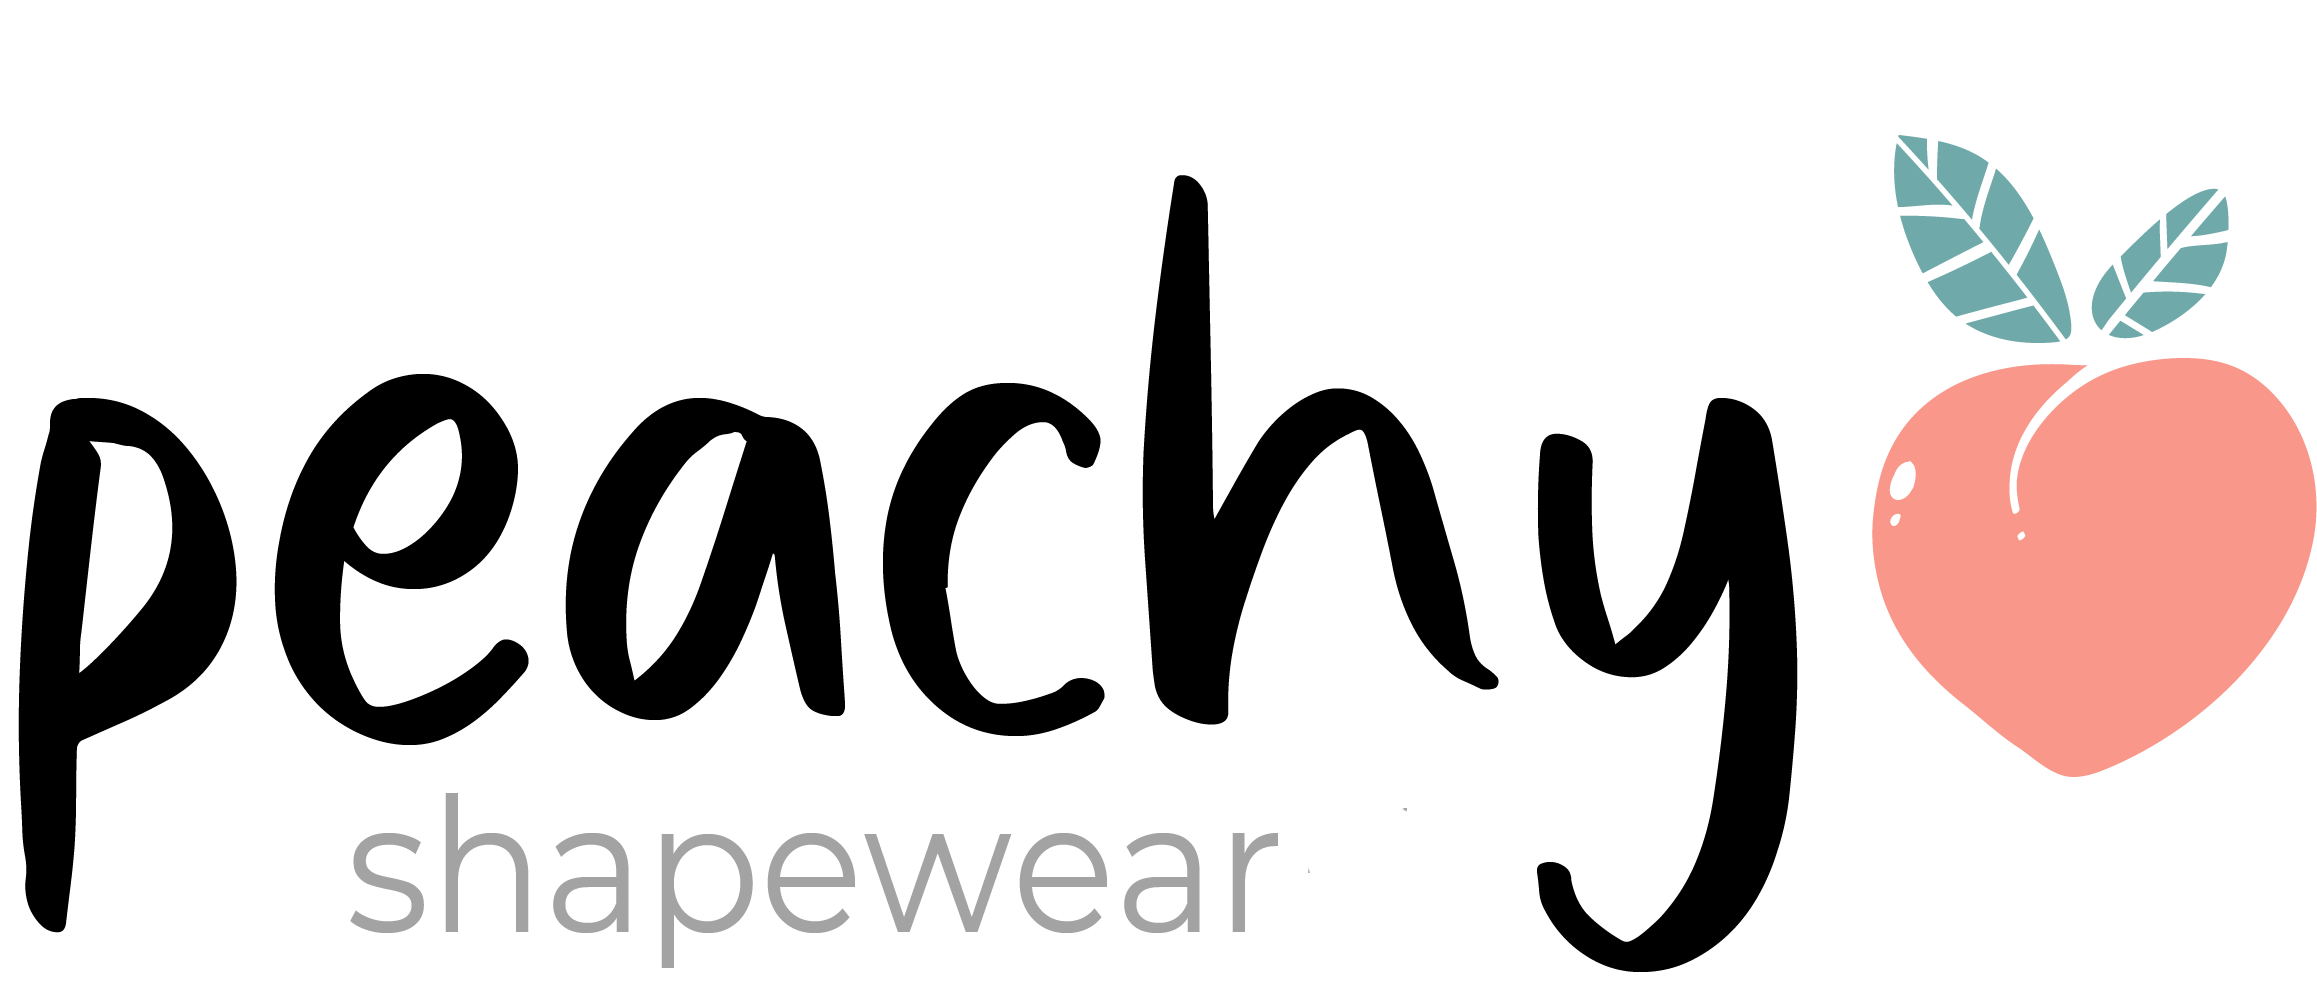 Peachy Shapewear - Official Site